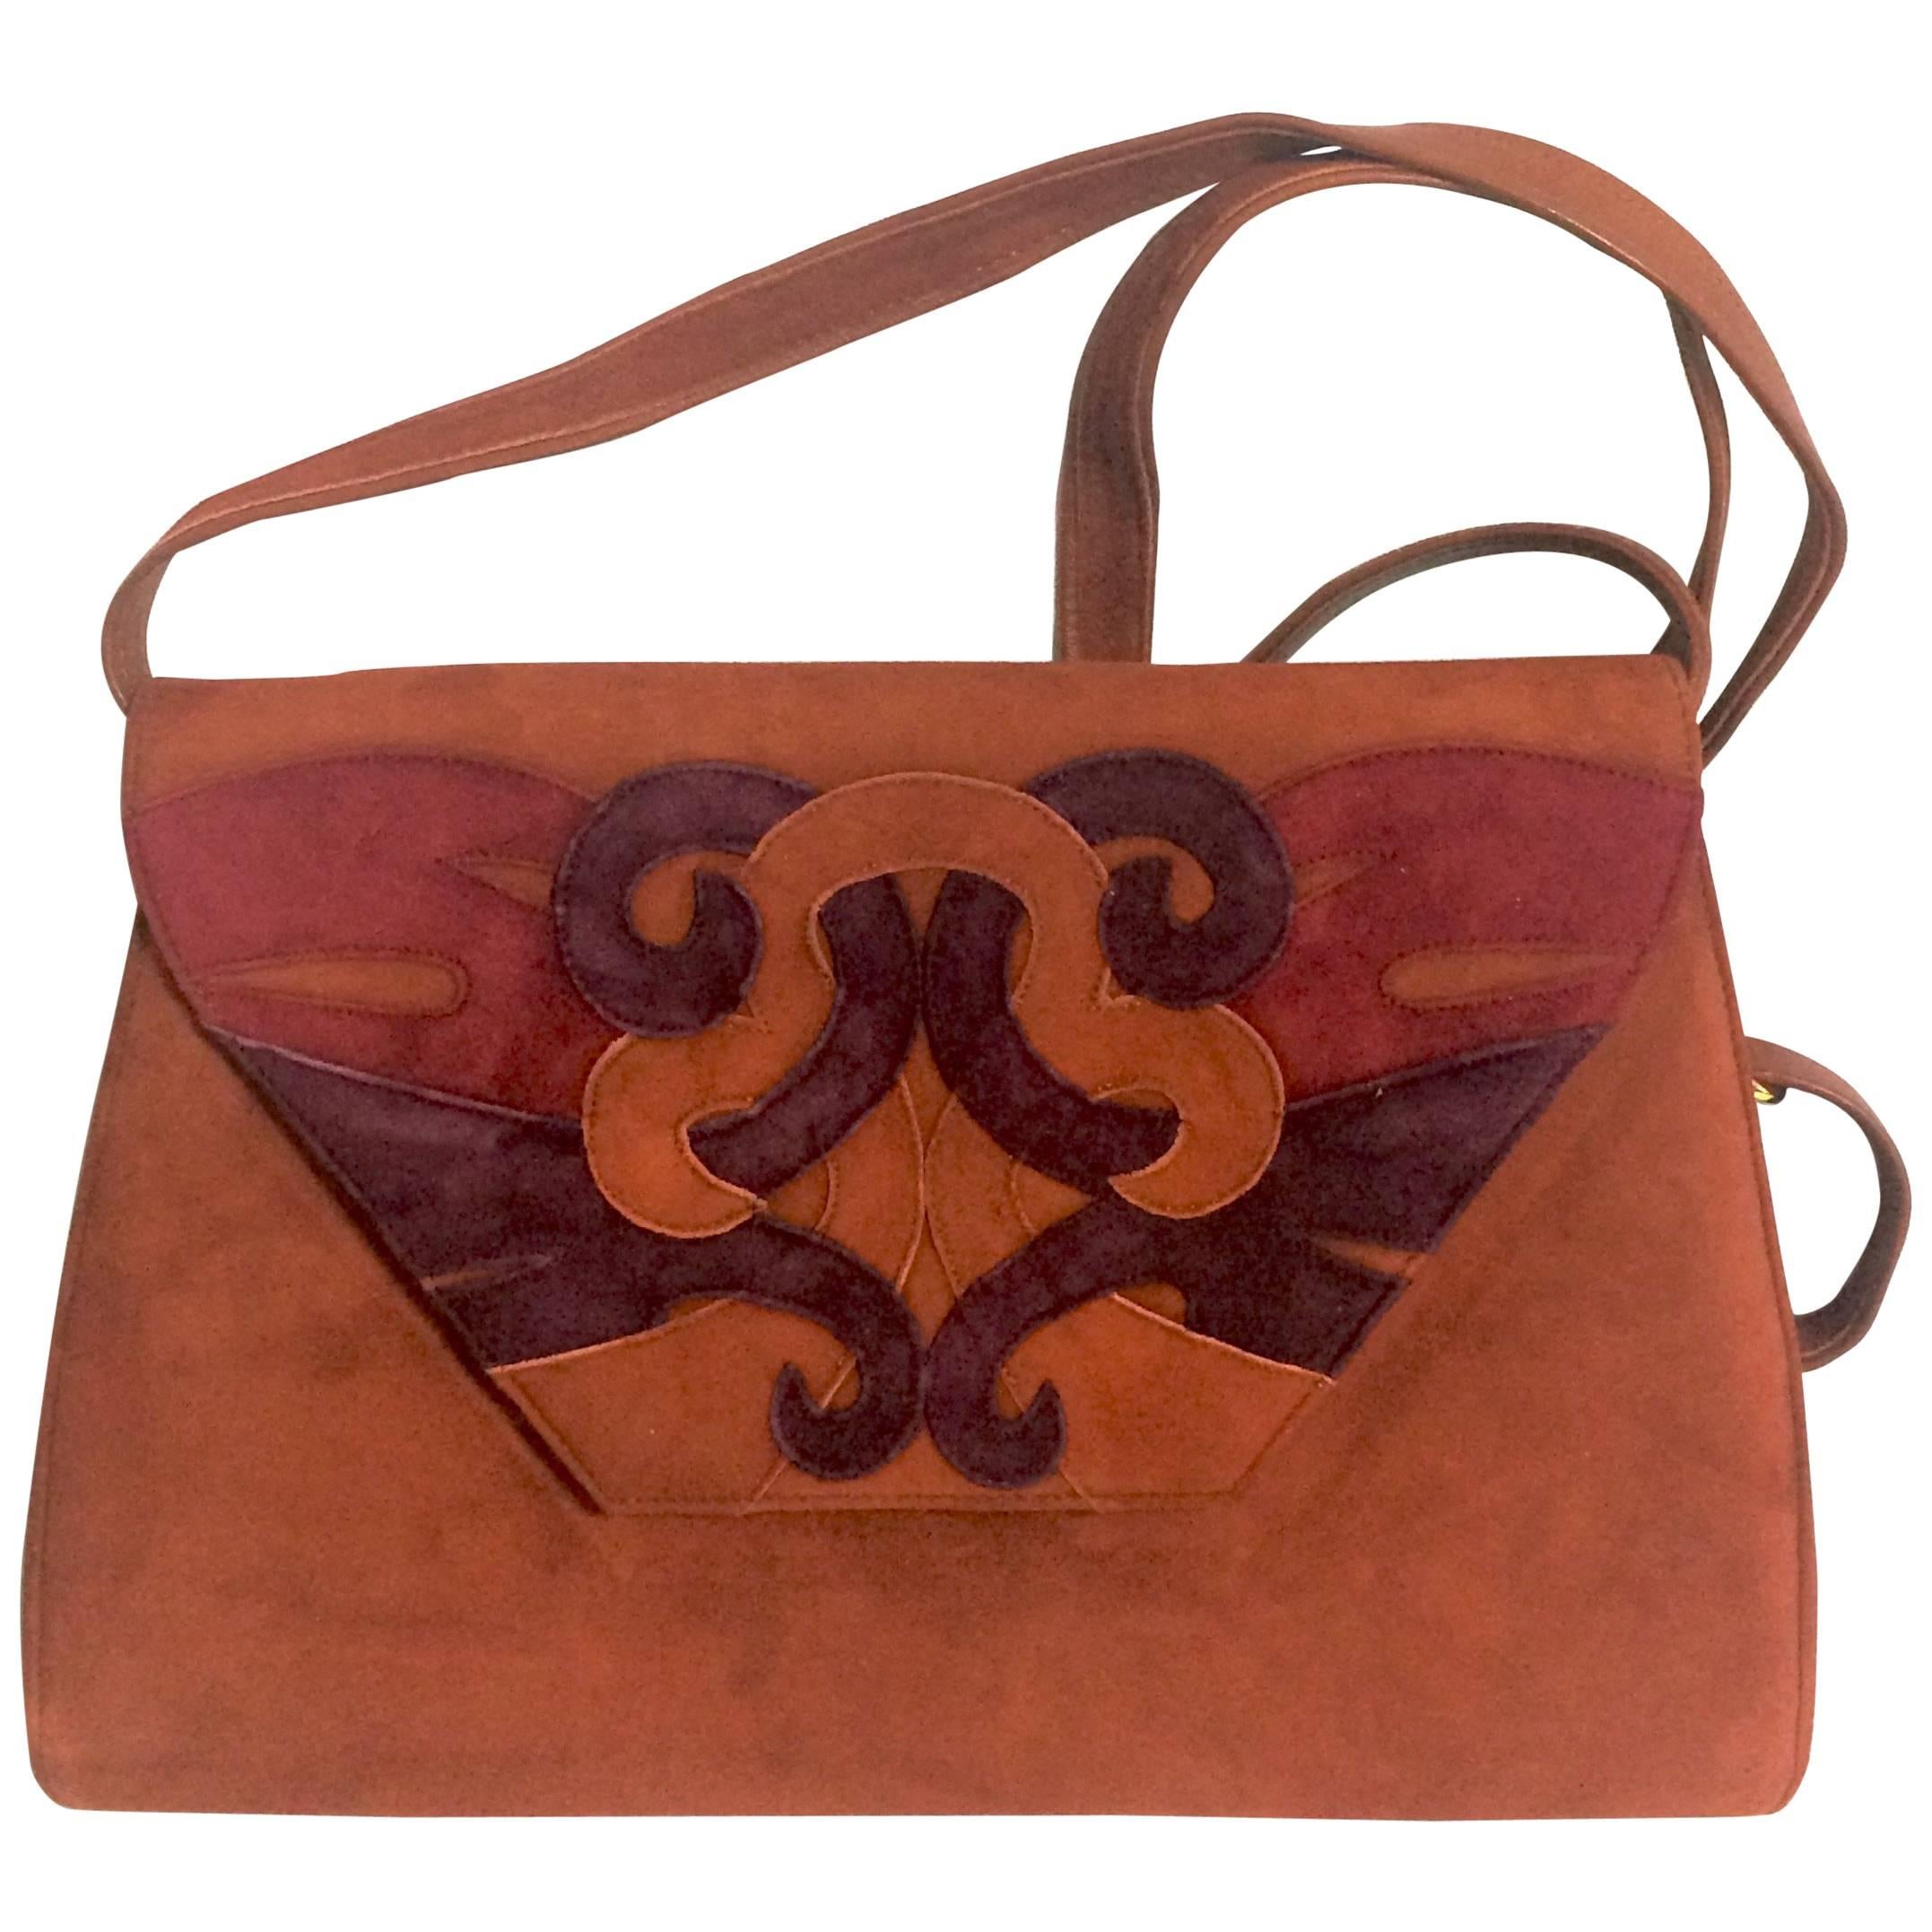 Vintage Bally brown, red, and purple suede leather shoulder bag, clutch bag. For Sale